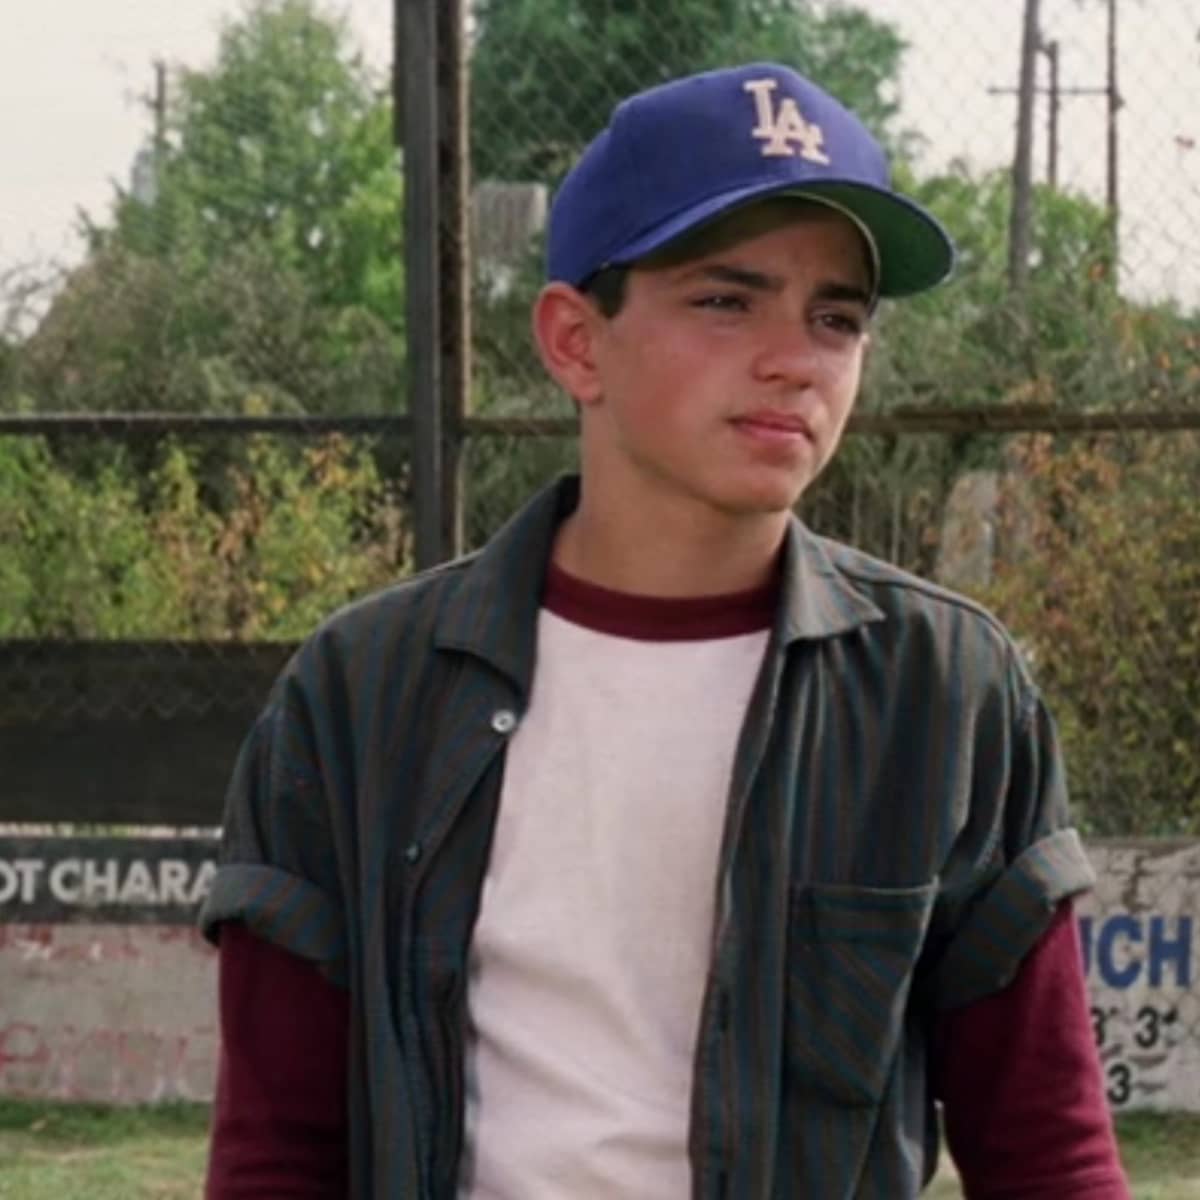 Baseball Movies That'll Scratch Your Itch Till the Season Starts